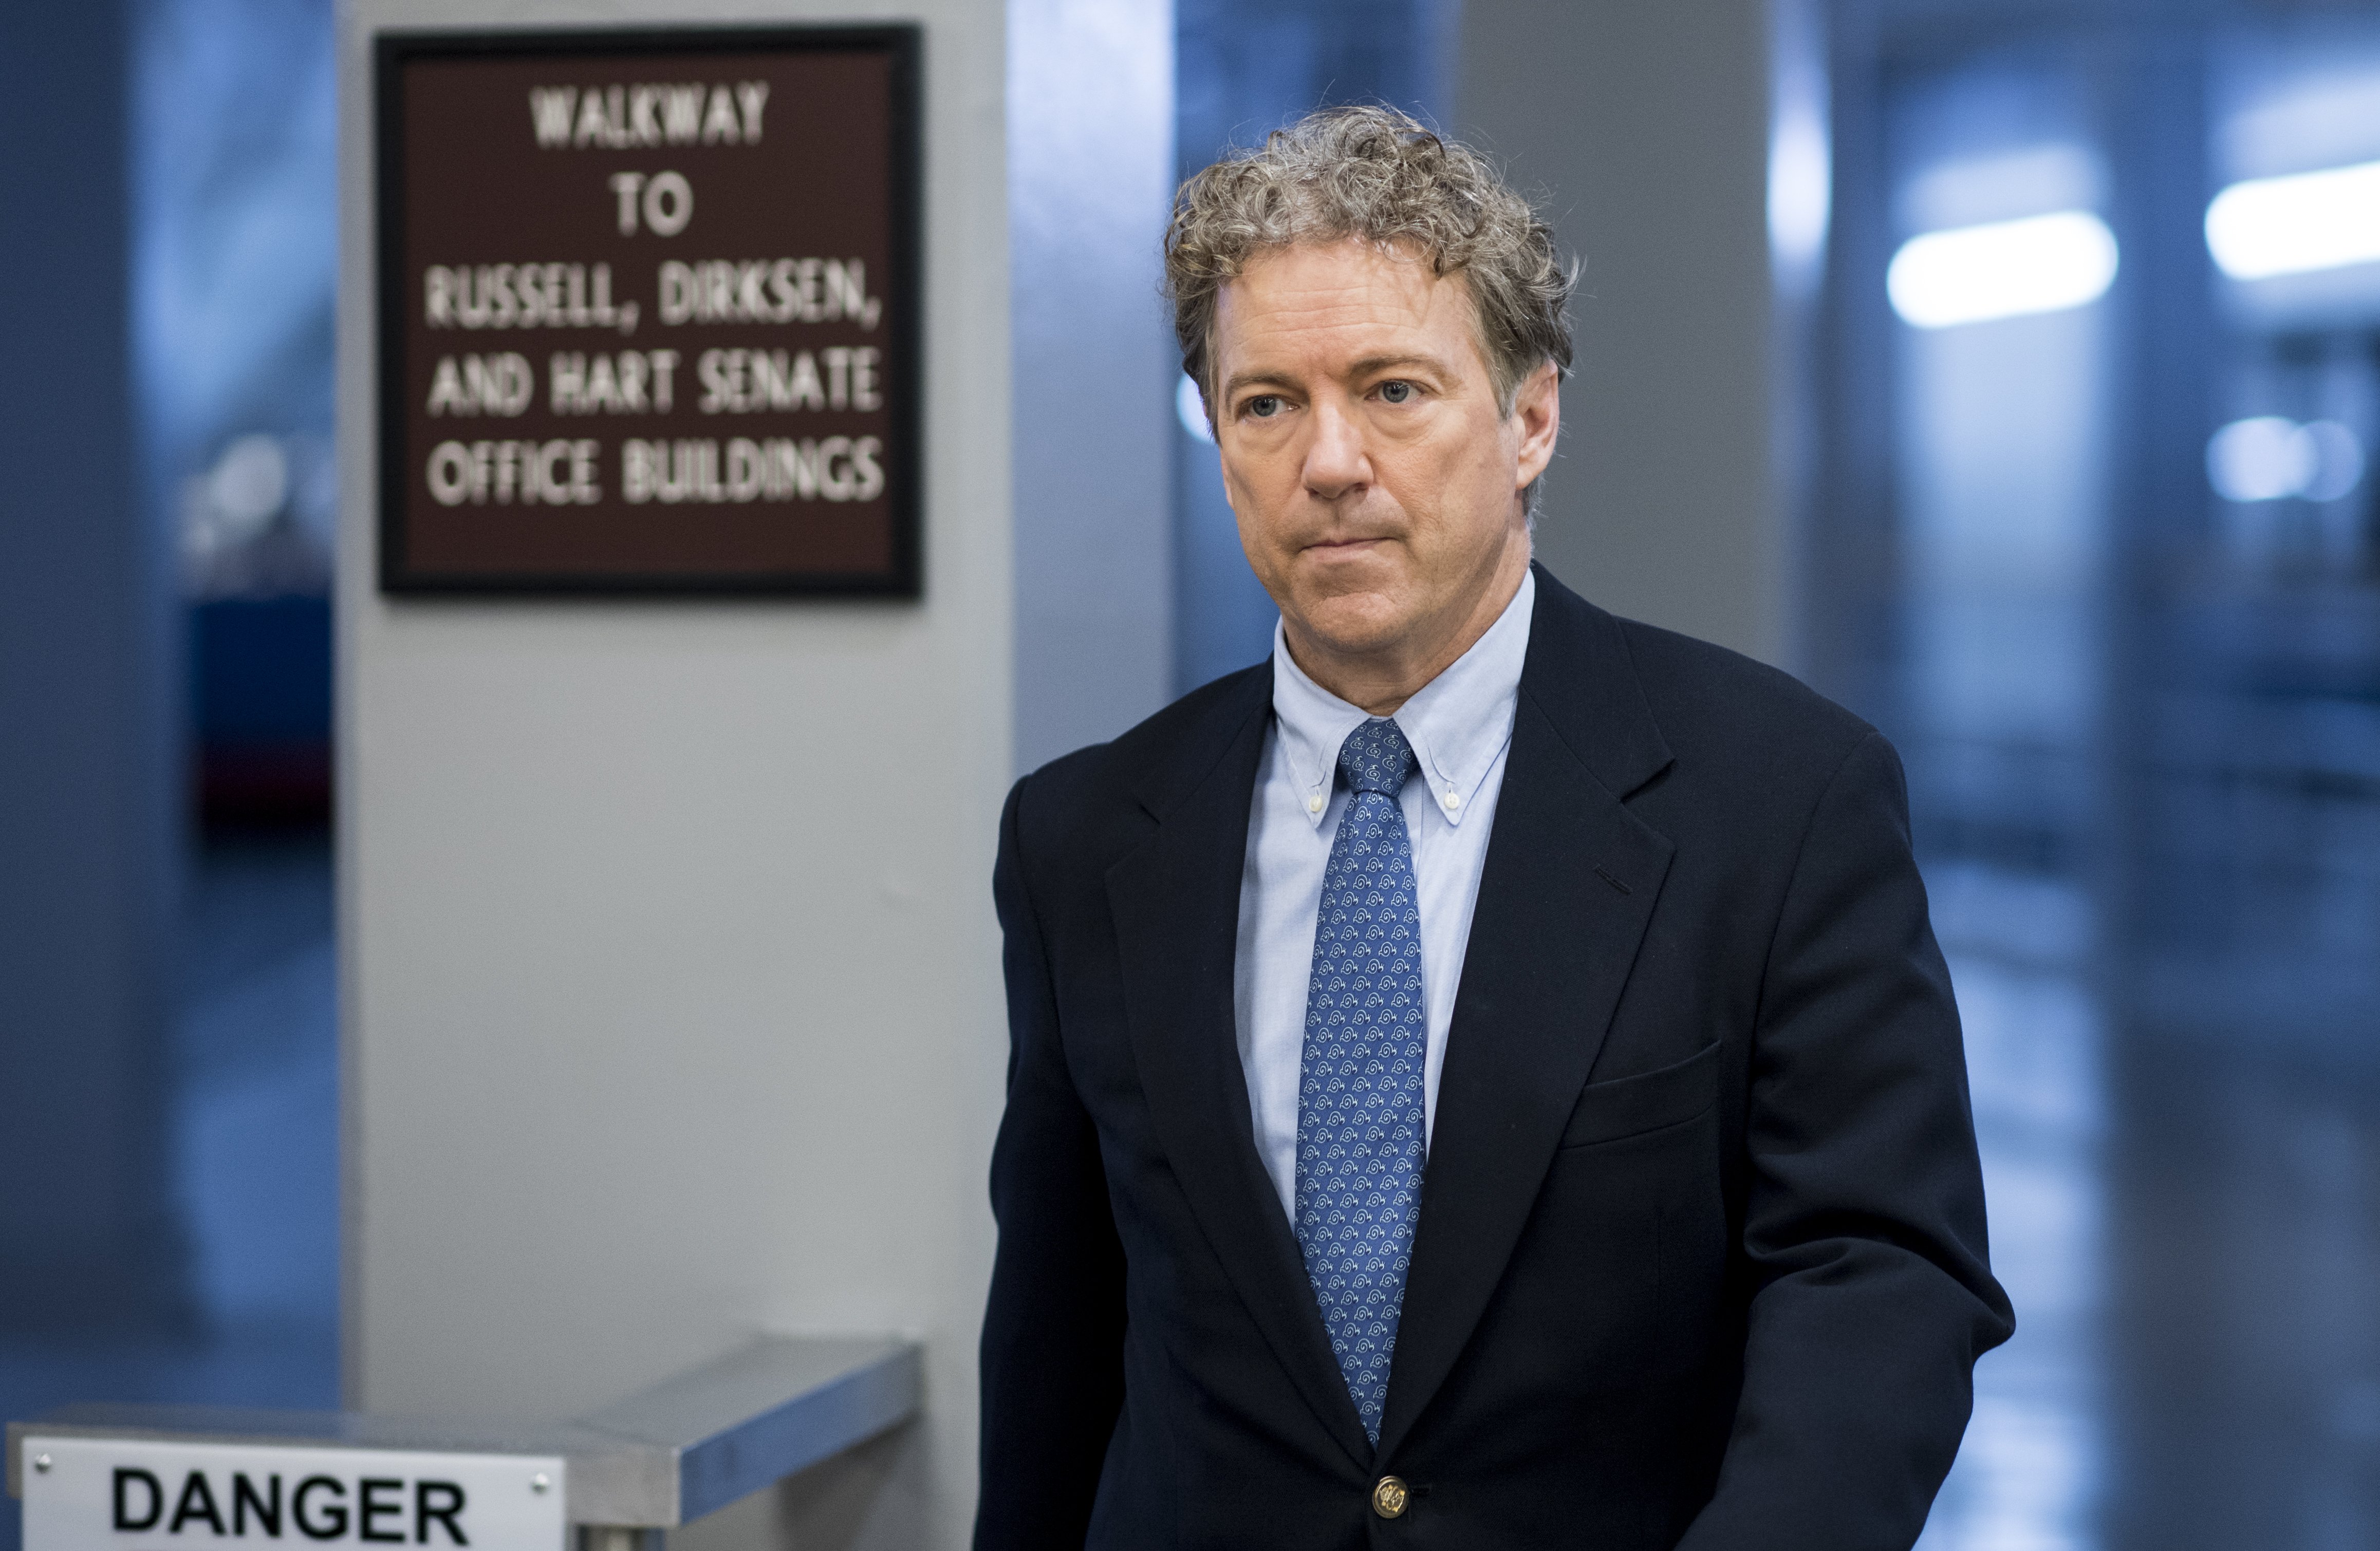 Senator Rand Paul, R-Ky., arriving at the United States Capitol for a vote on Wednesday, January 10, 2018, in Washington D.C. | Photo: Bill Clark/CQ Roll Call